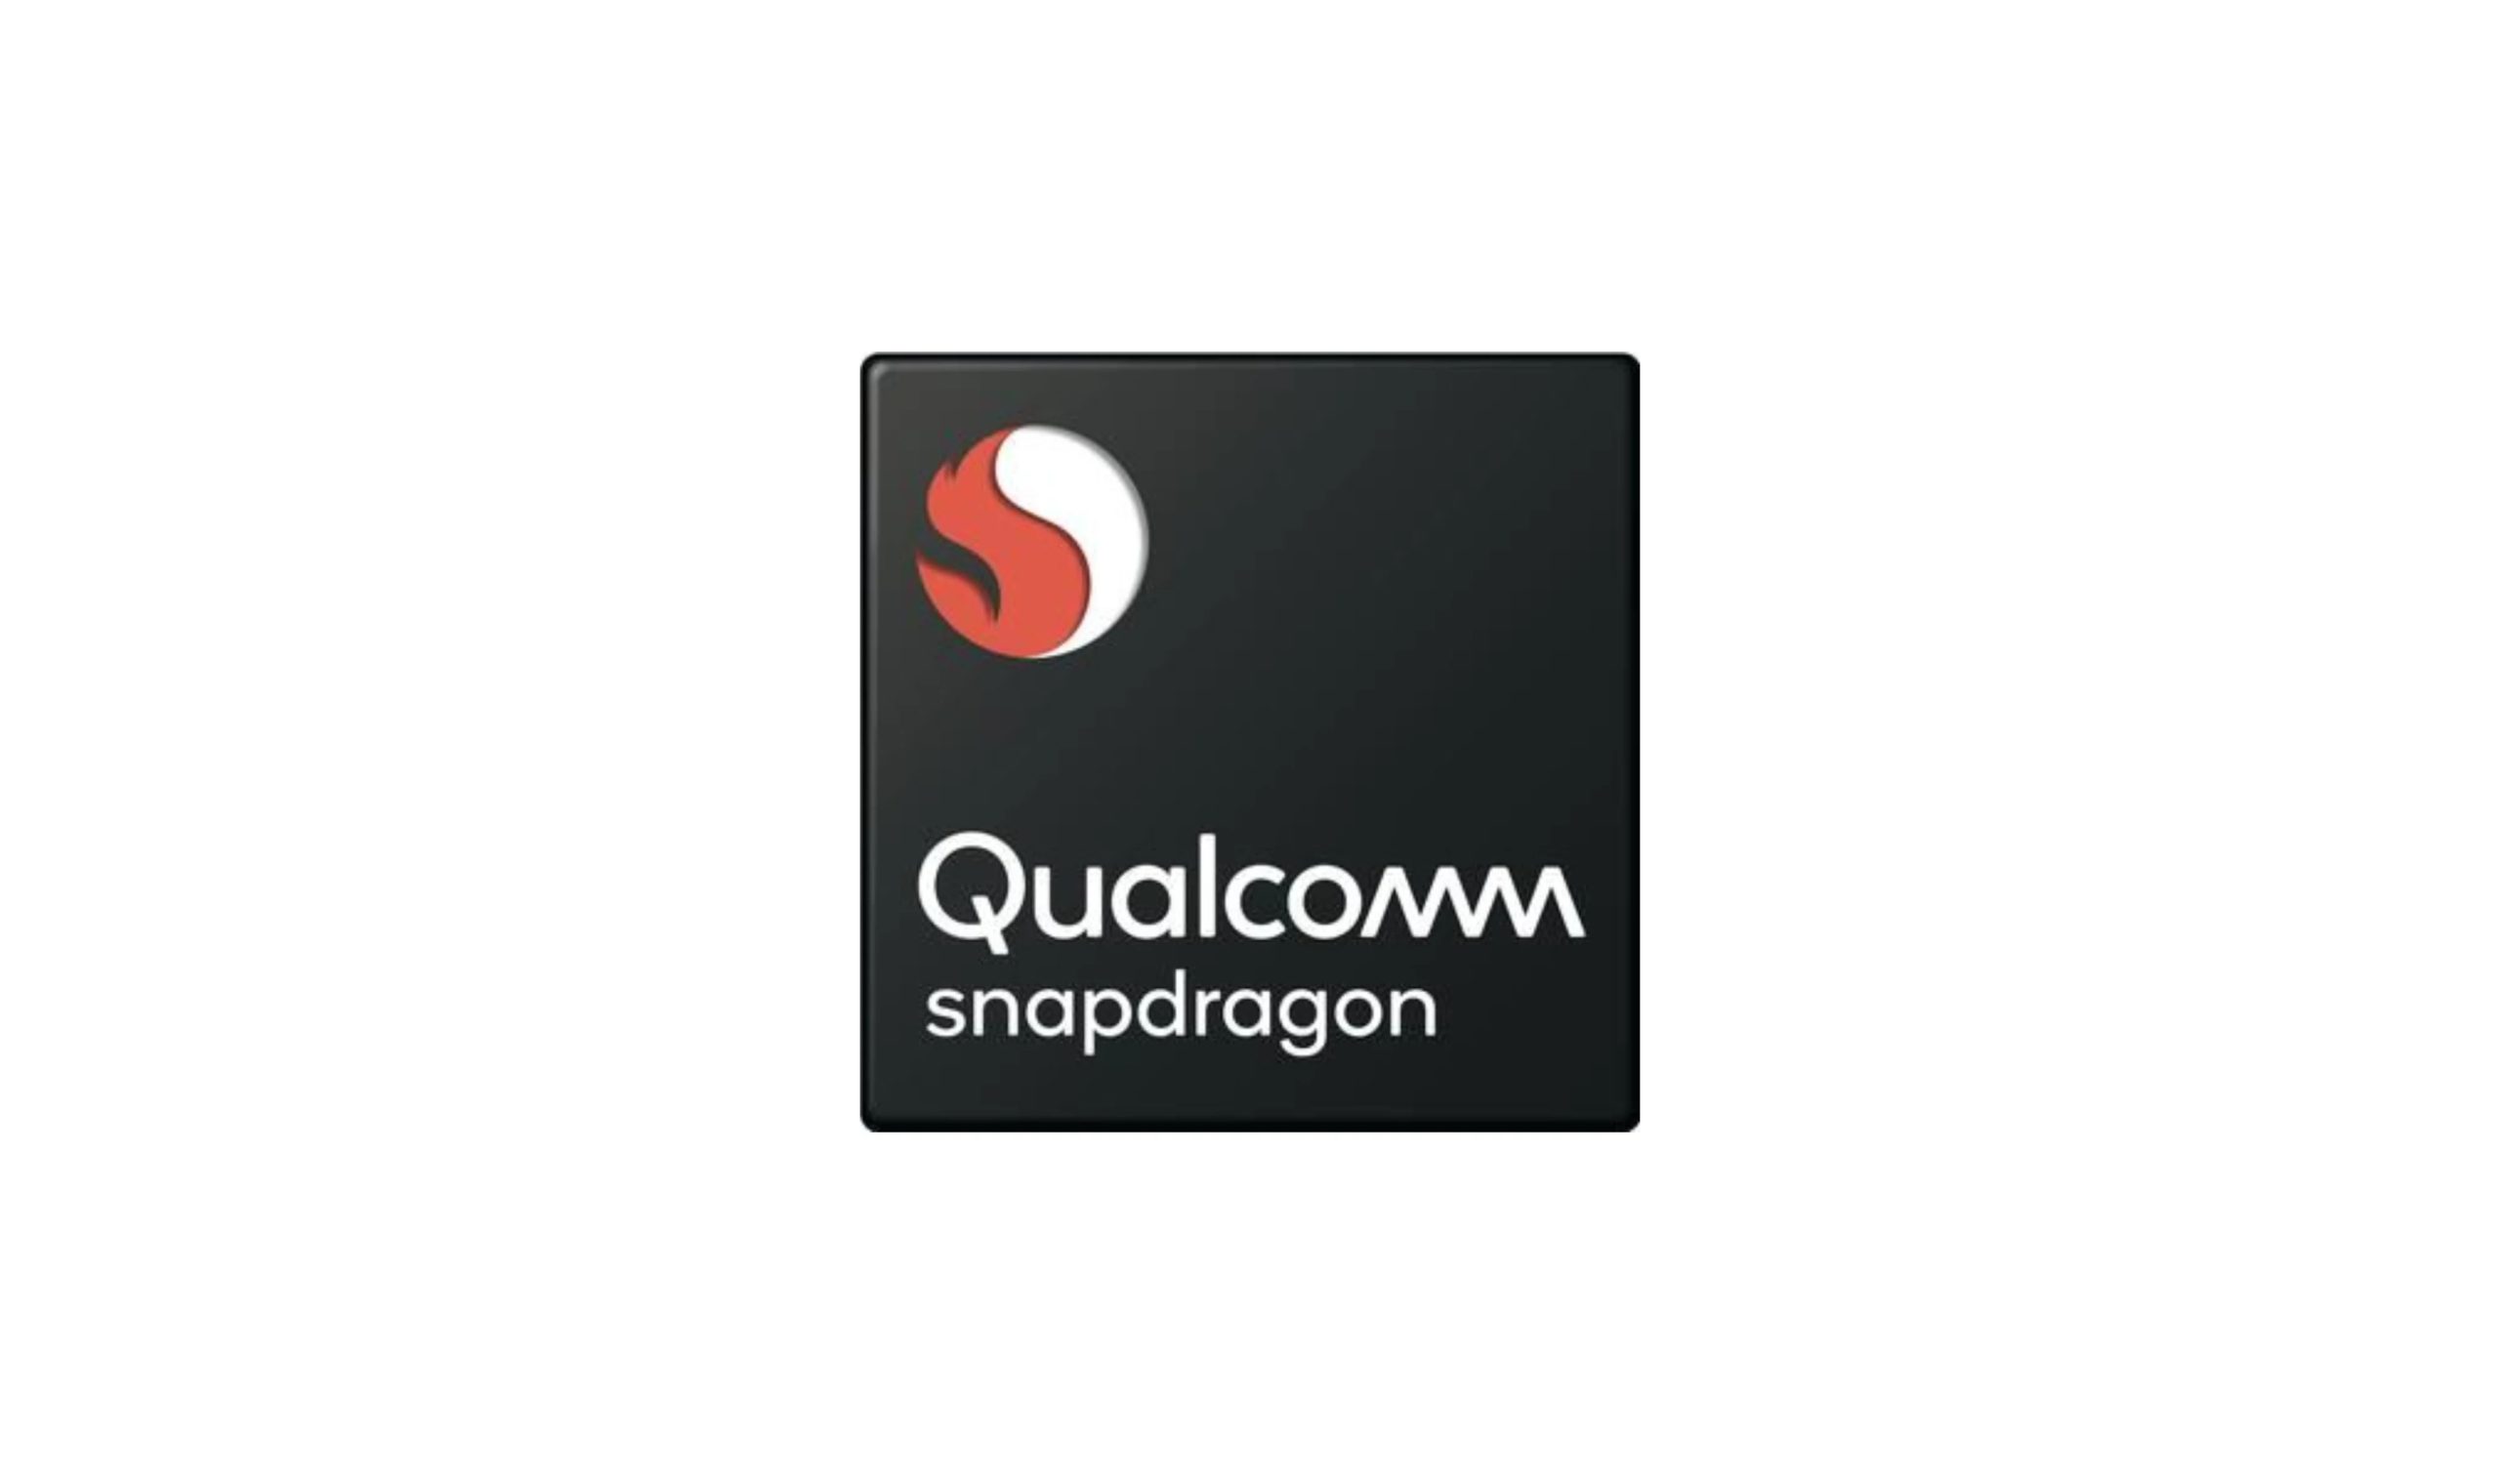 Qualcomm Snapdragon Logo Feature scaled